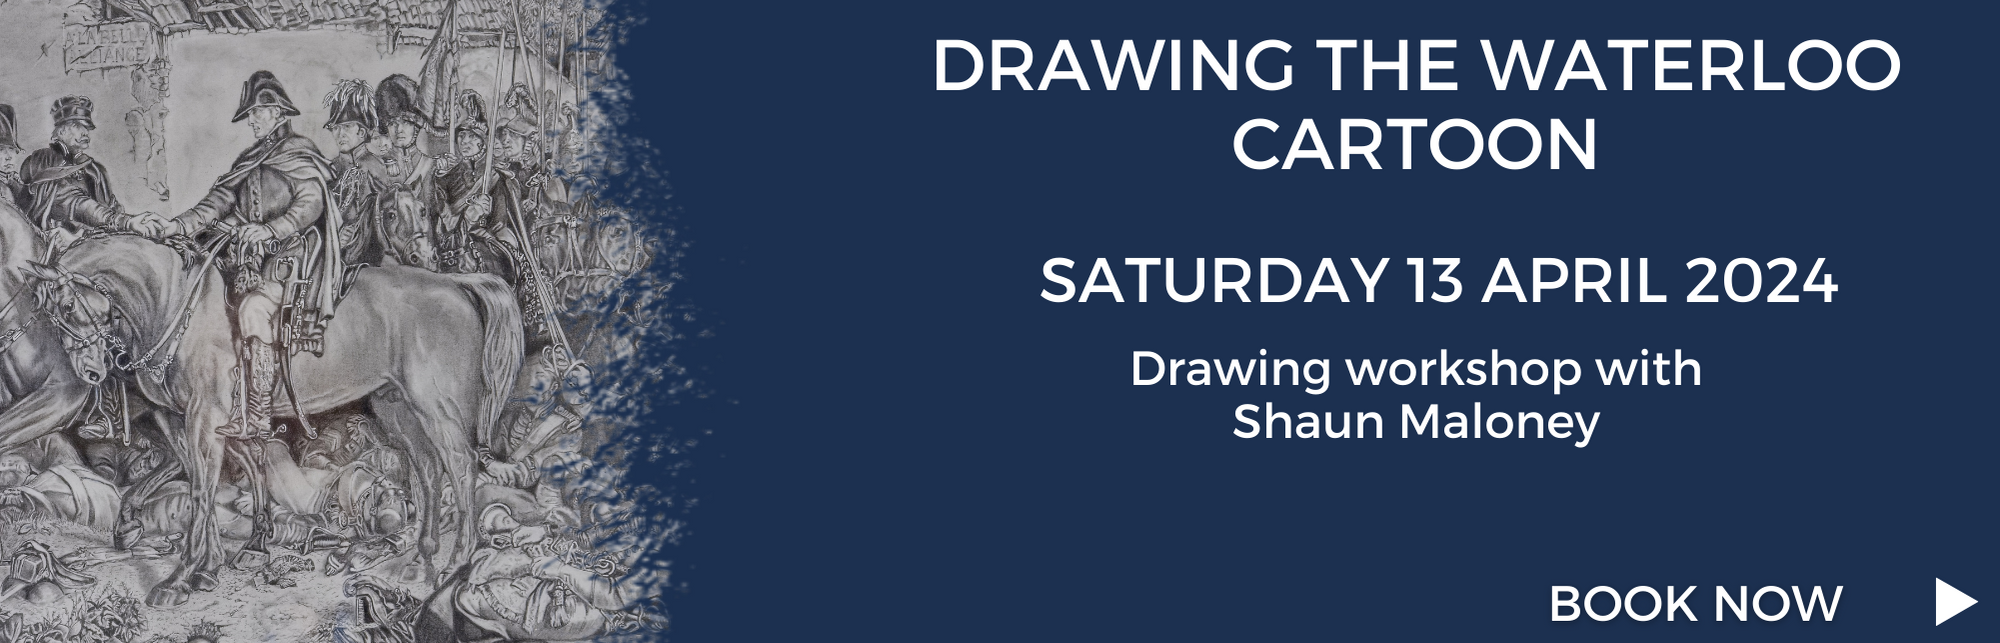 Click here to book tickets for the Drawing the Waterloo Cartoon art workshop on 13 April 2024